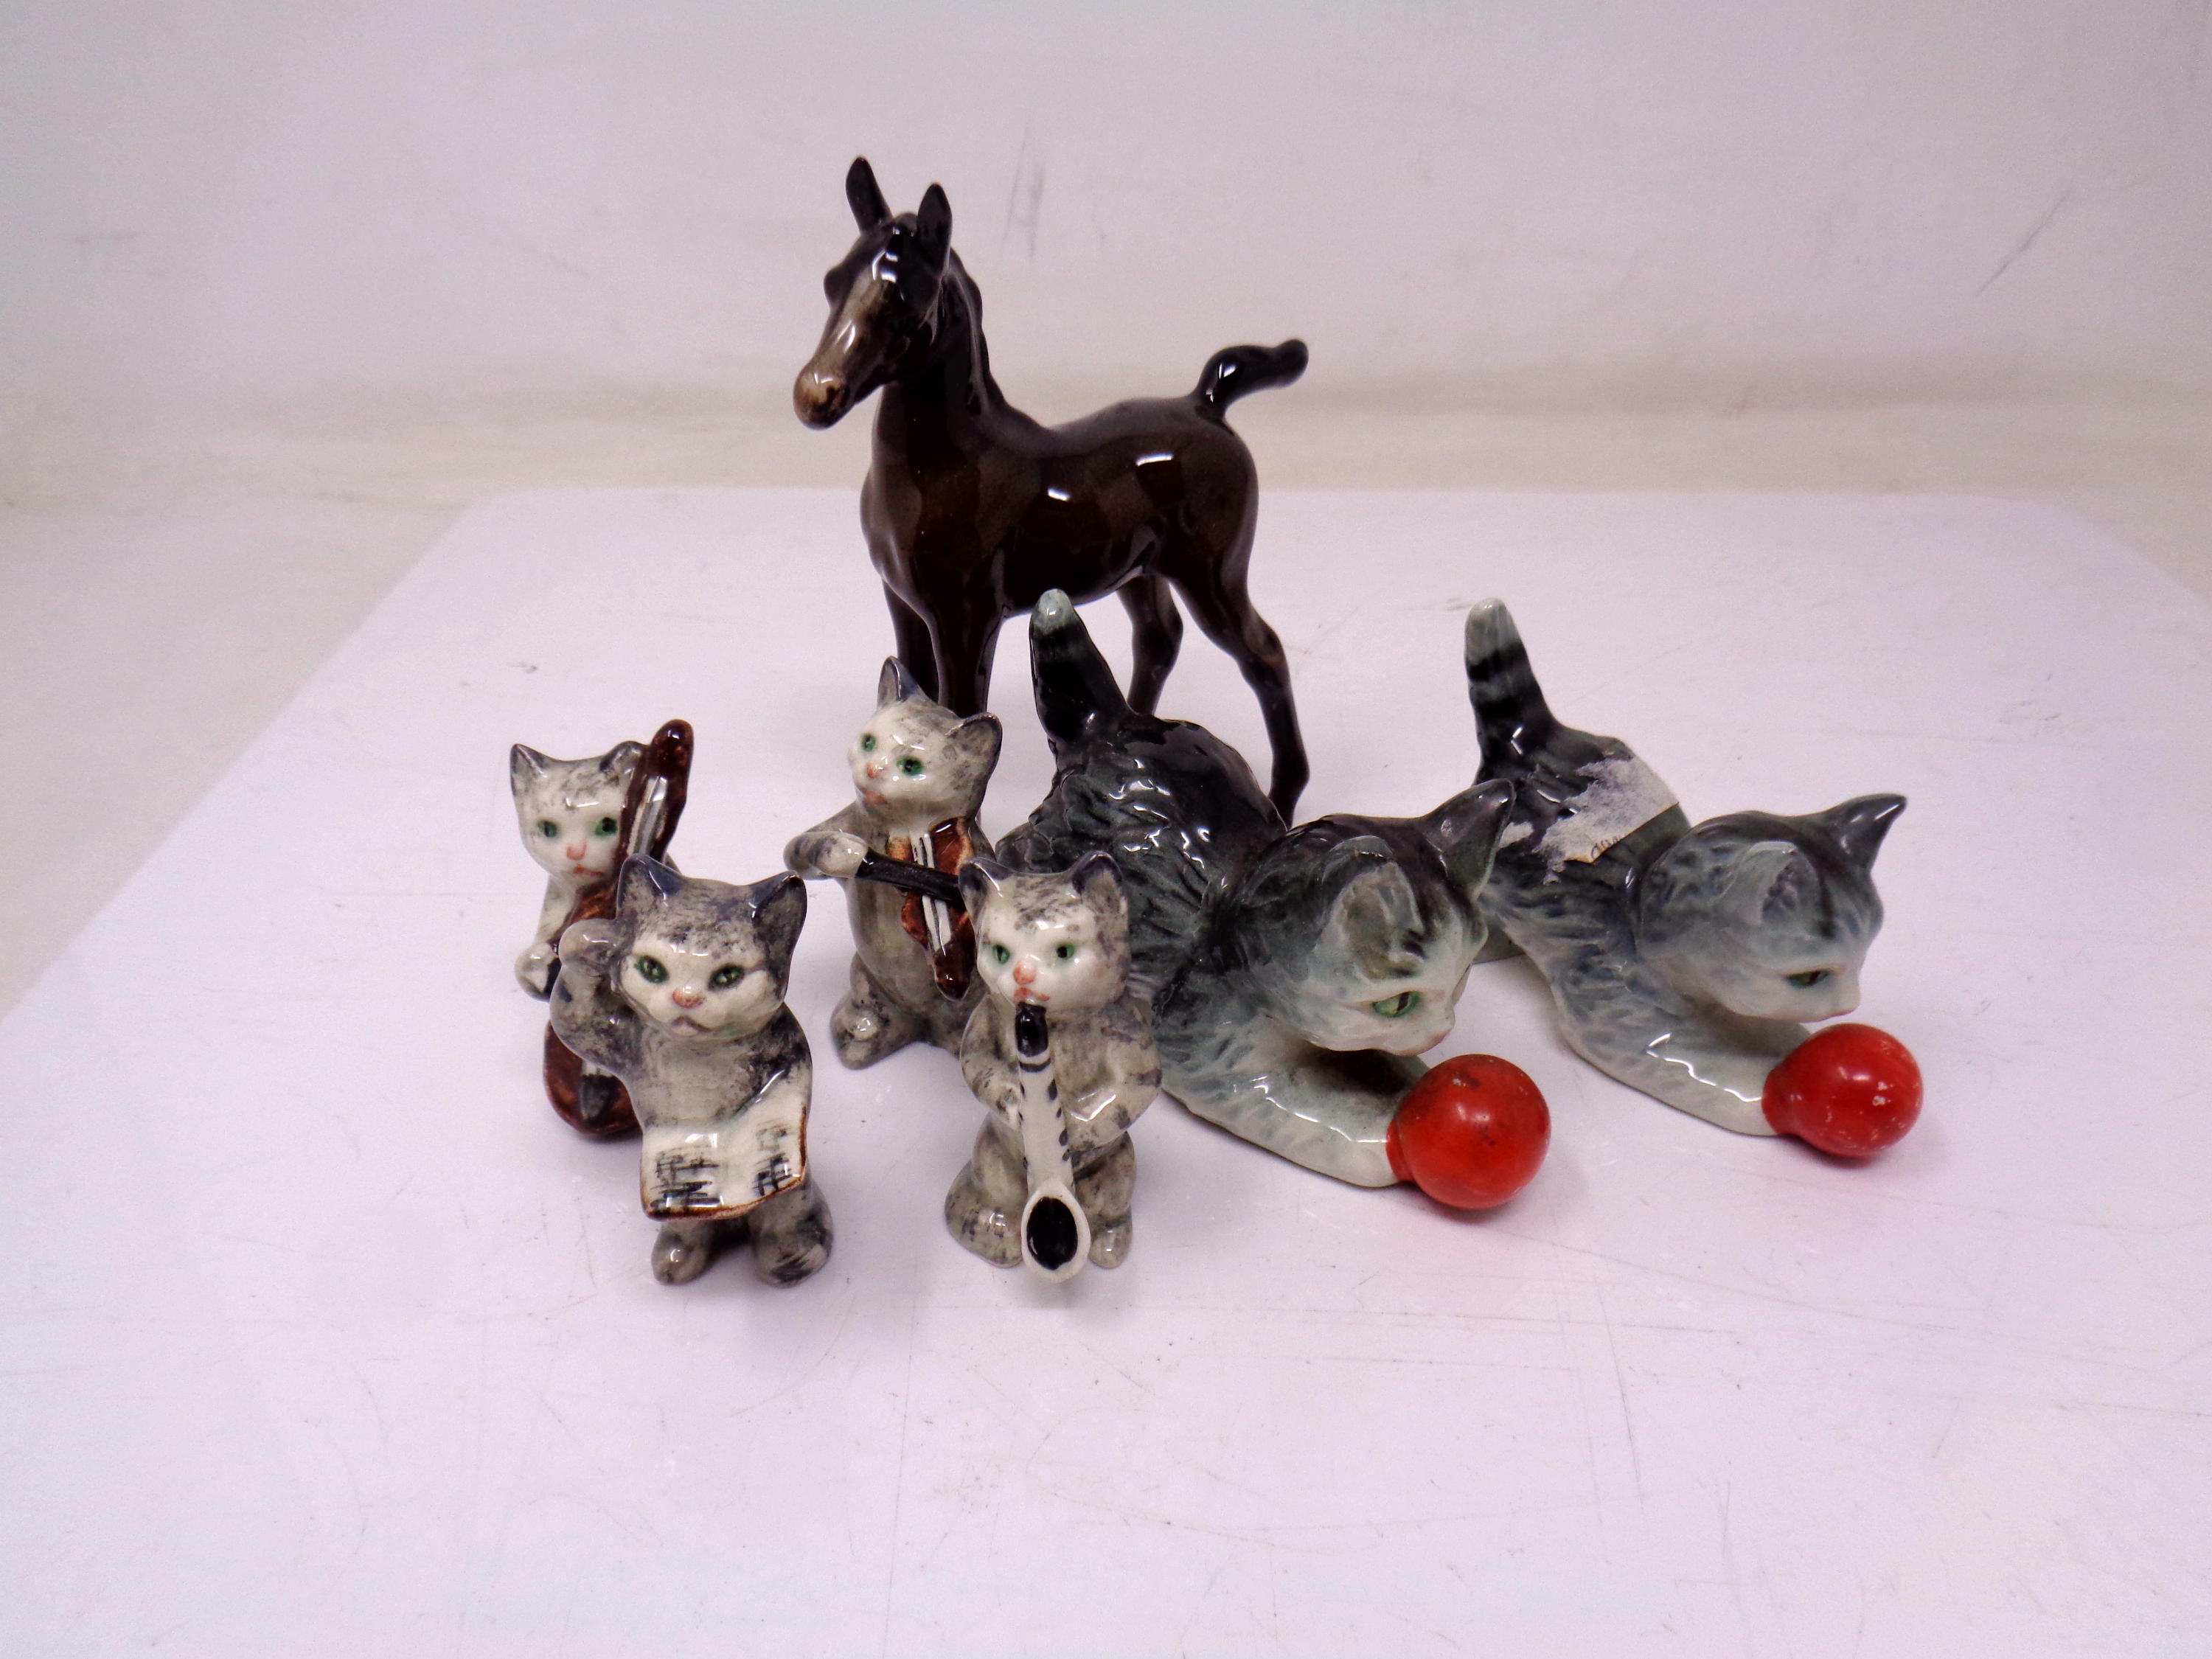 A Beswick figure of a foal together with a cat musician group and two further cat figures.